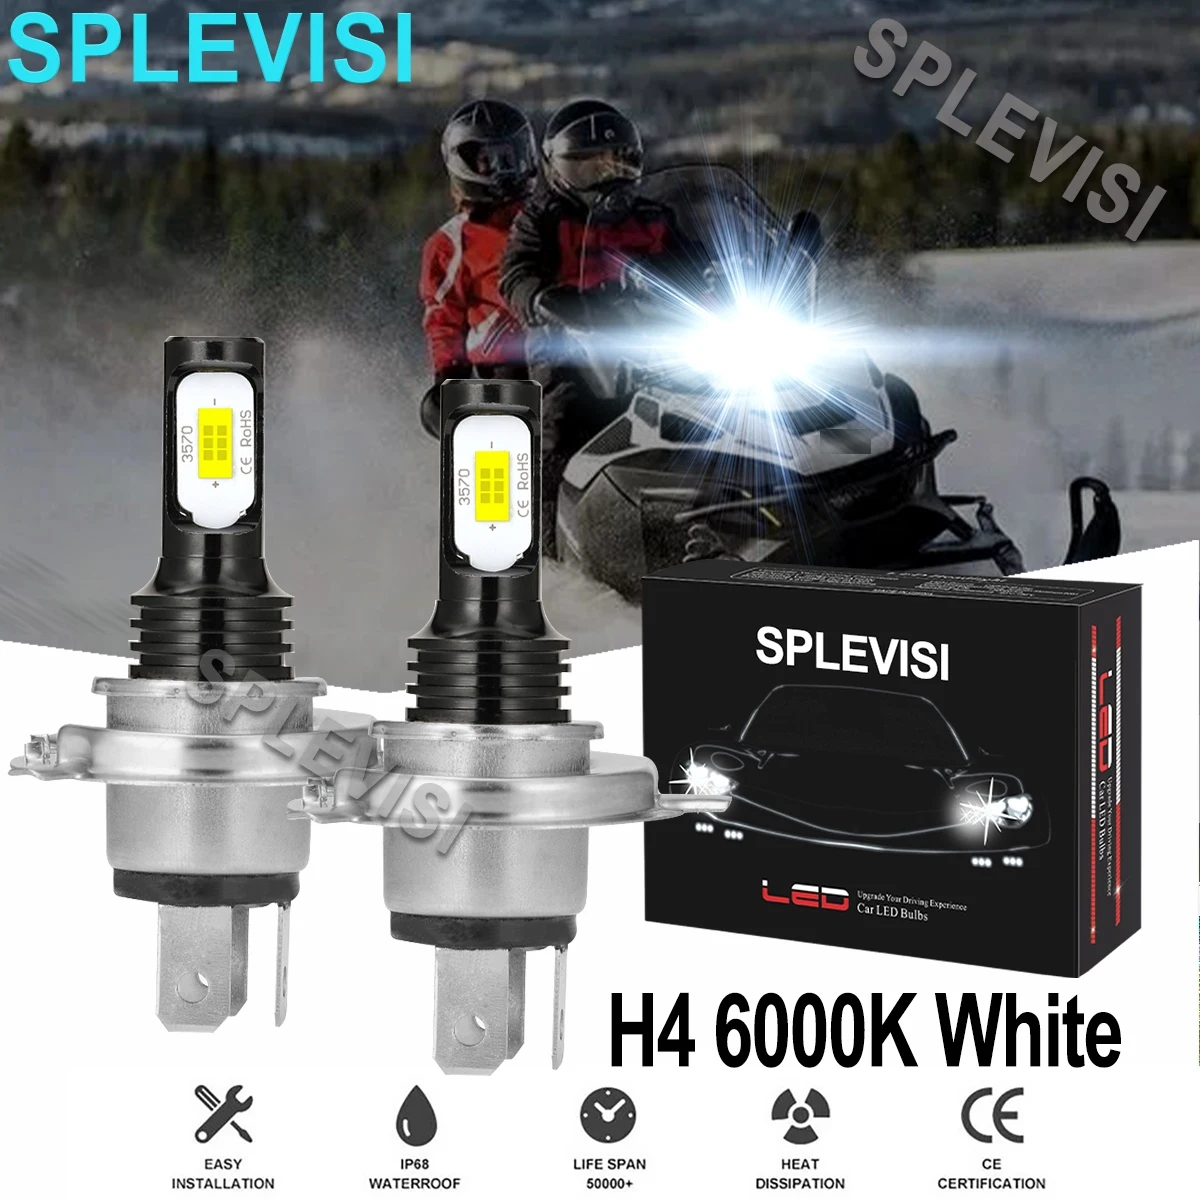 2x 70W White LED Headlights For Skidoo Touring 1994-2020 Backcountry 850 Etec 2018 2019 Expedition 2005-2019 Tundra 1993-2019